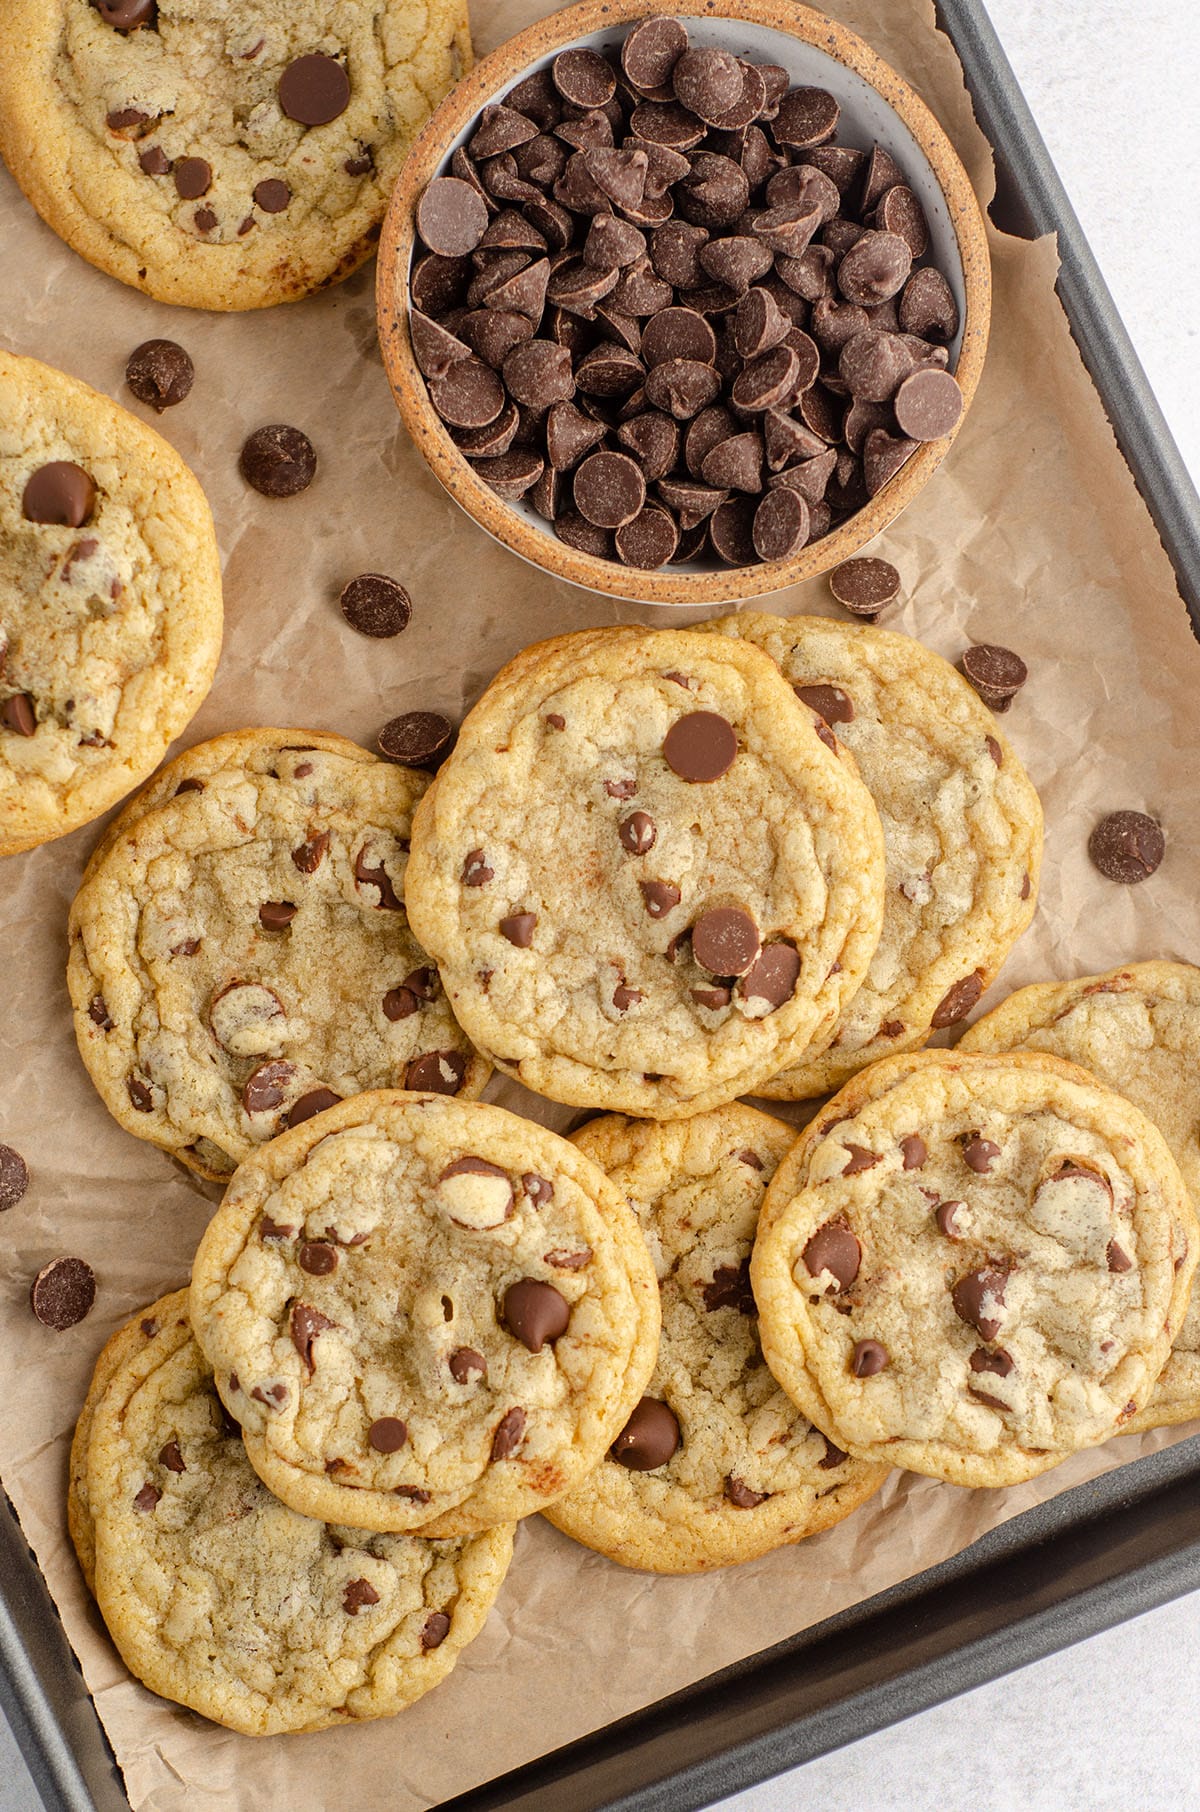 The Best Chewy Chocolate Chip Cookies Recipe